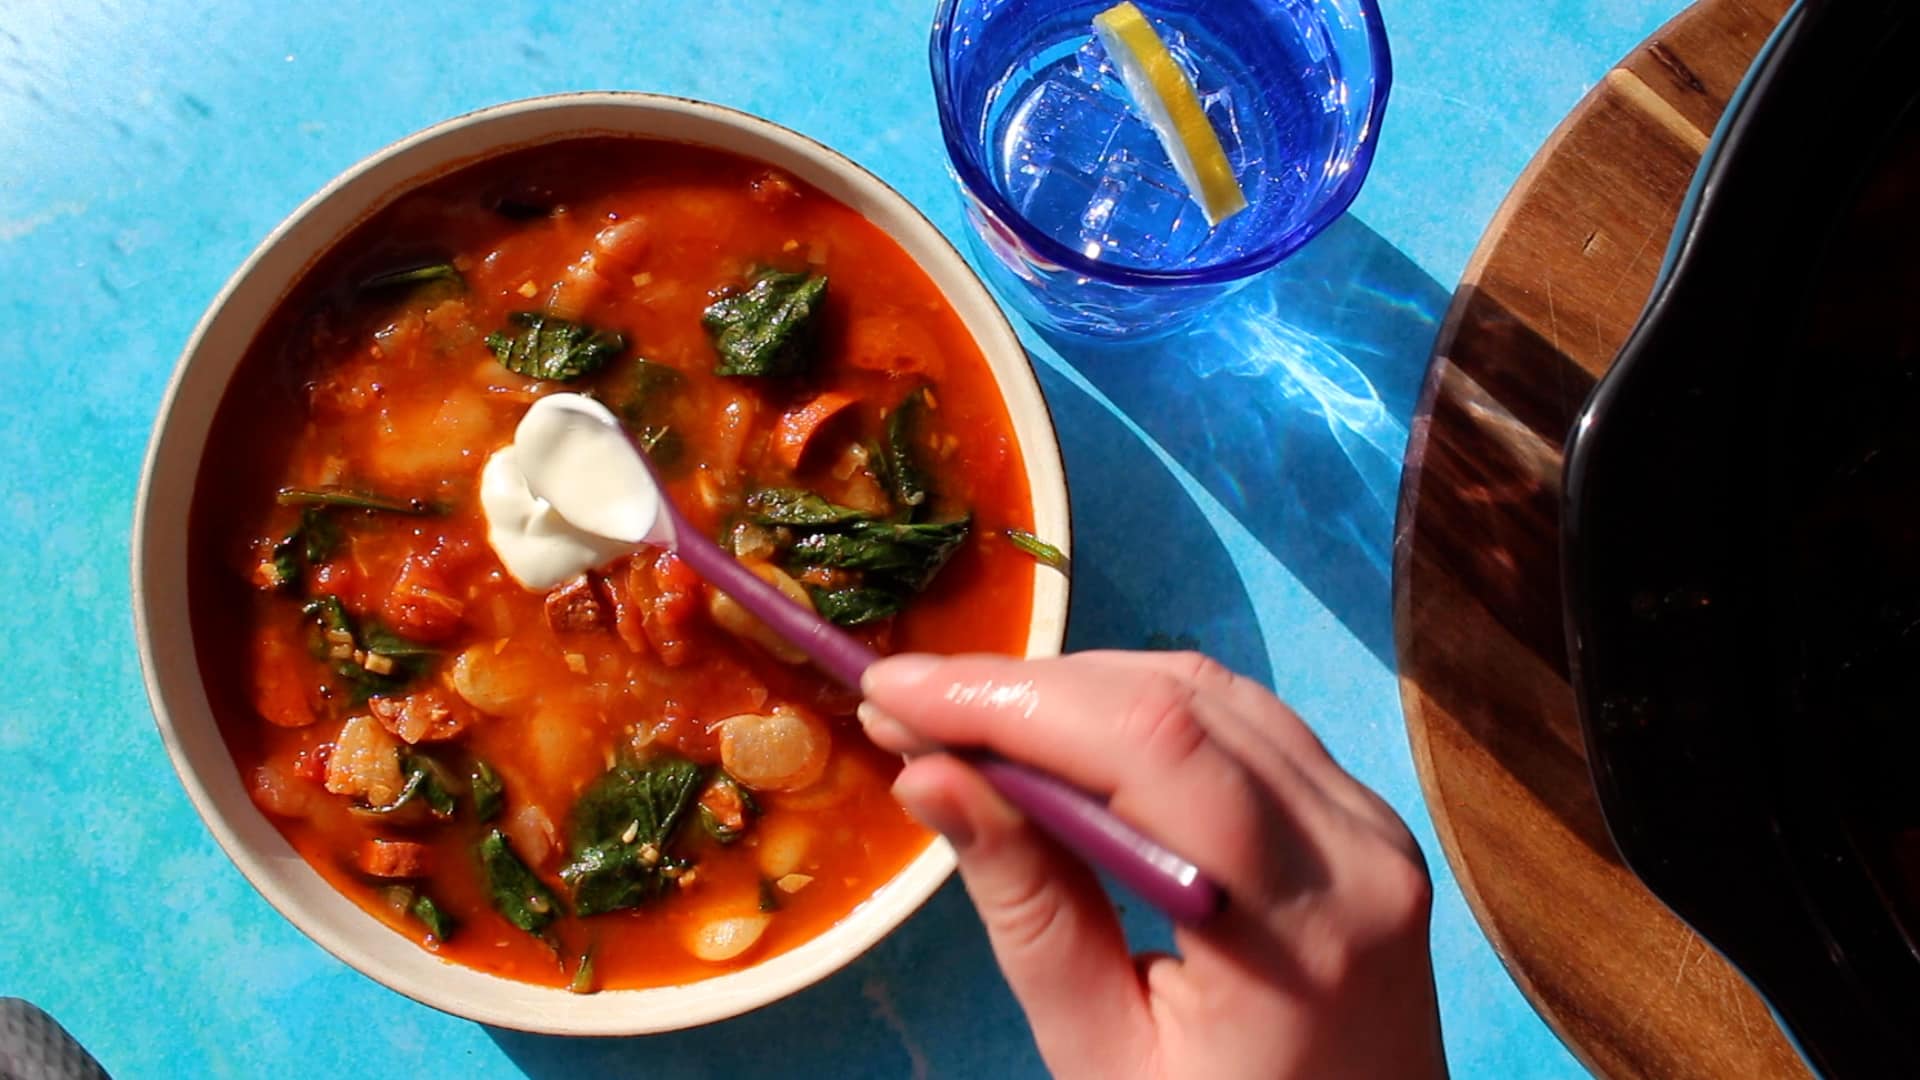 A bowl of Spanish Chorizo and Butter Bean Slow Cooker Stew with a dollop of sour cream and a blue glass with water.